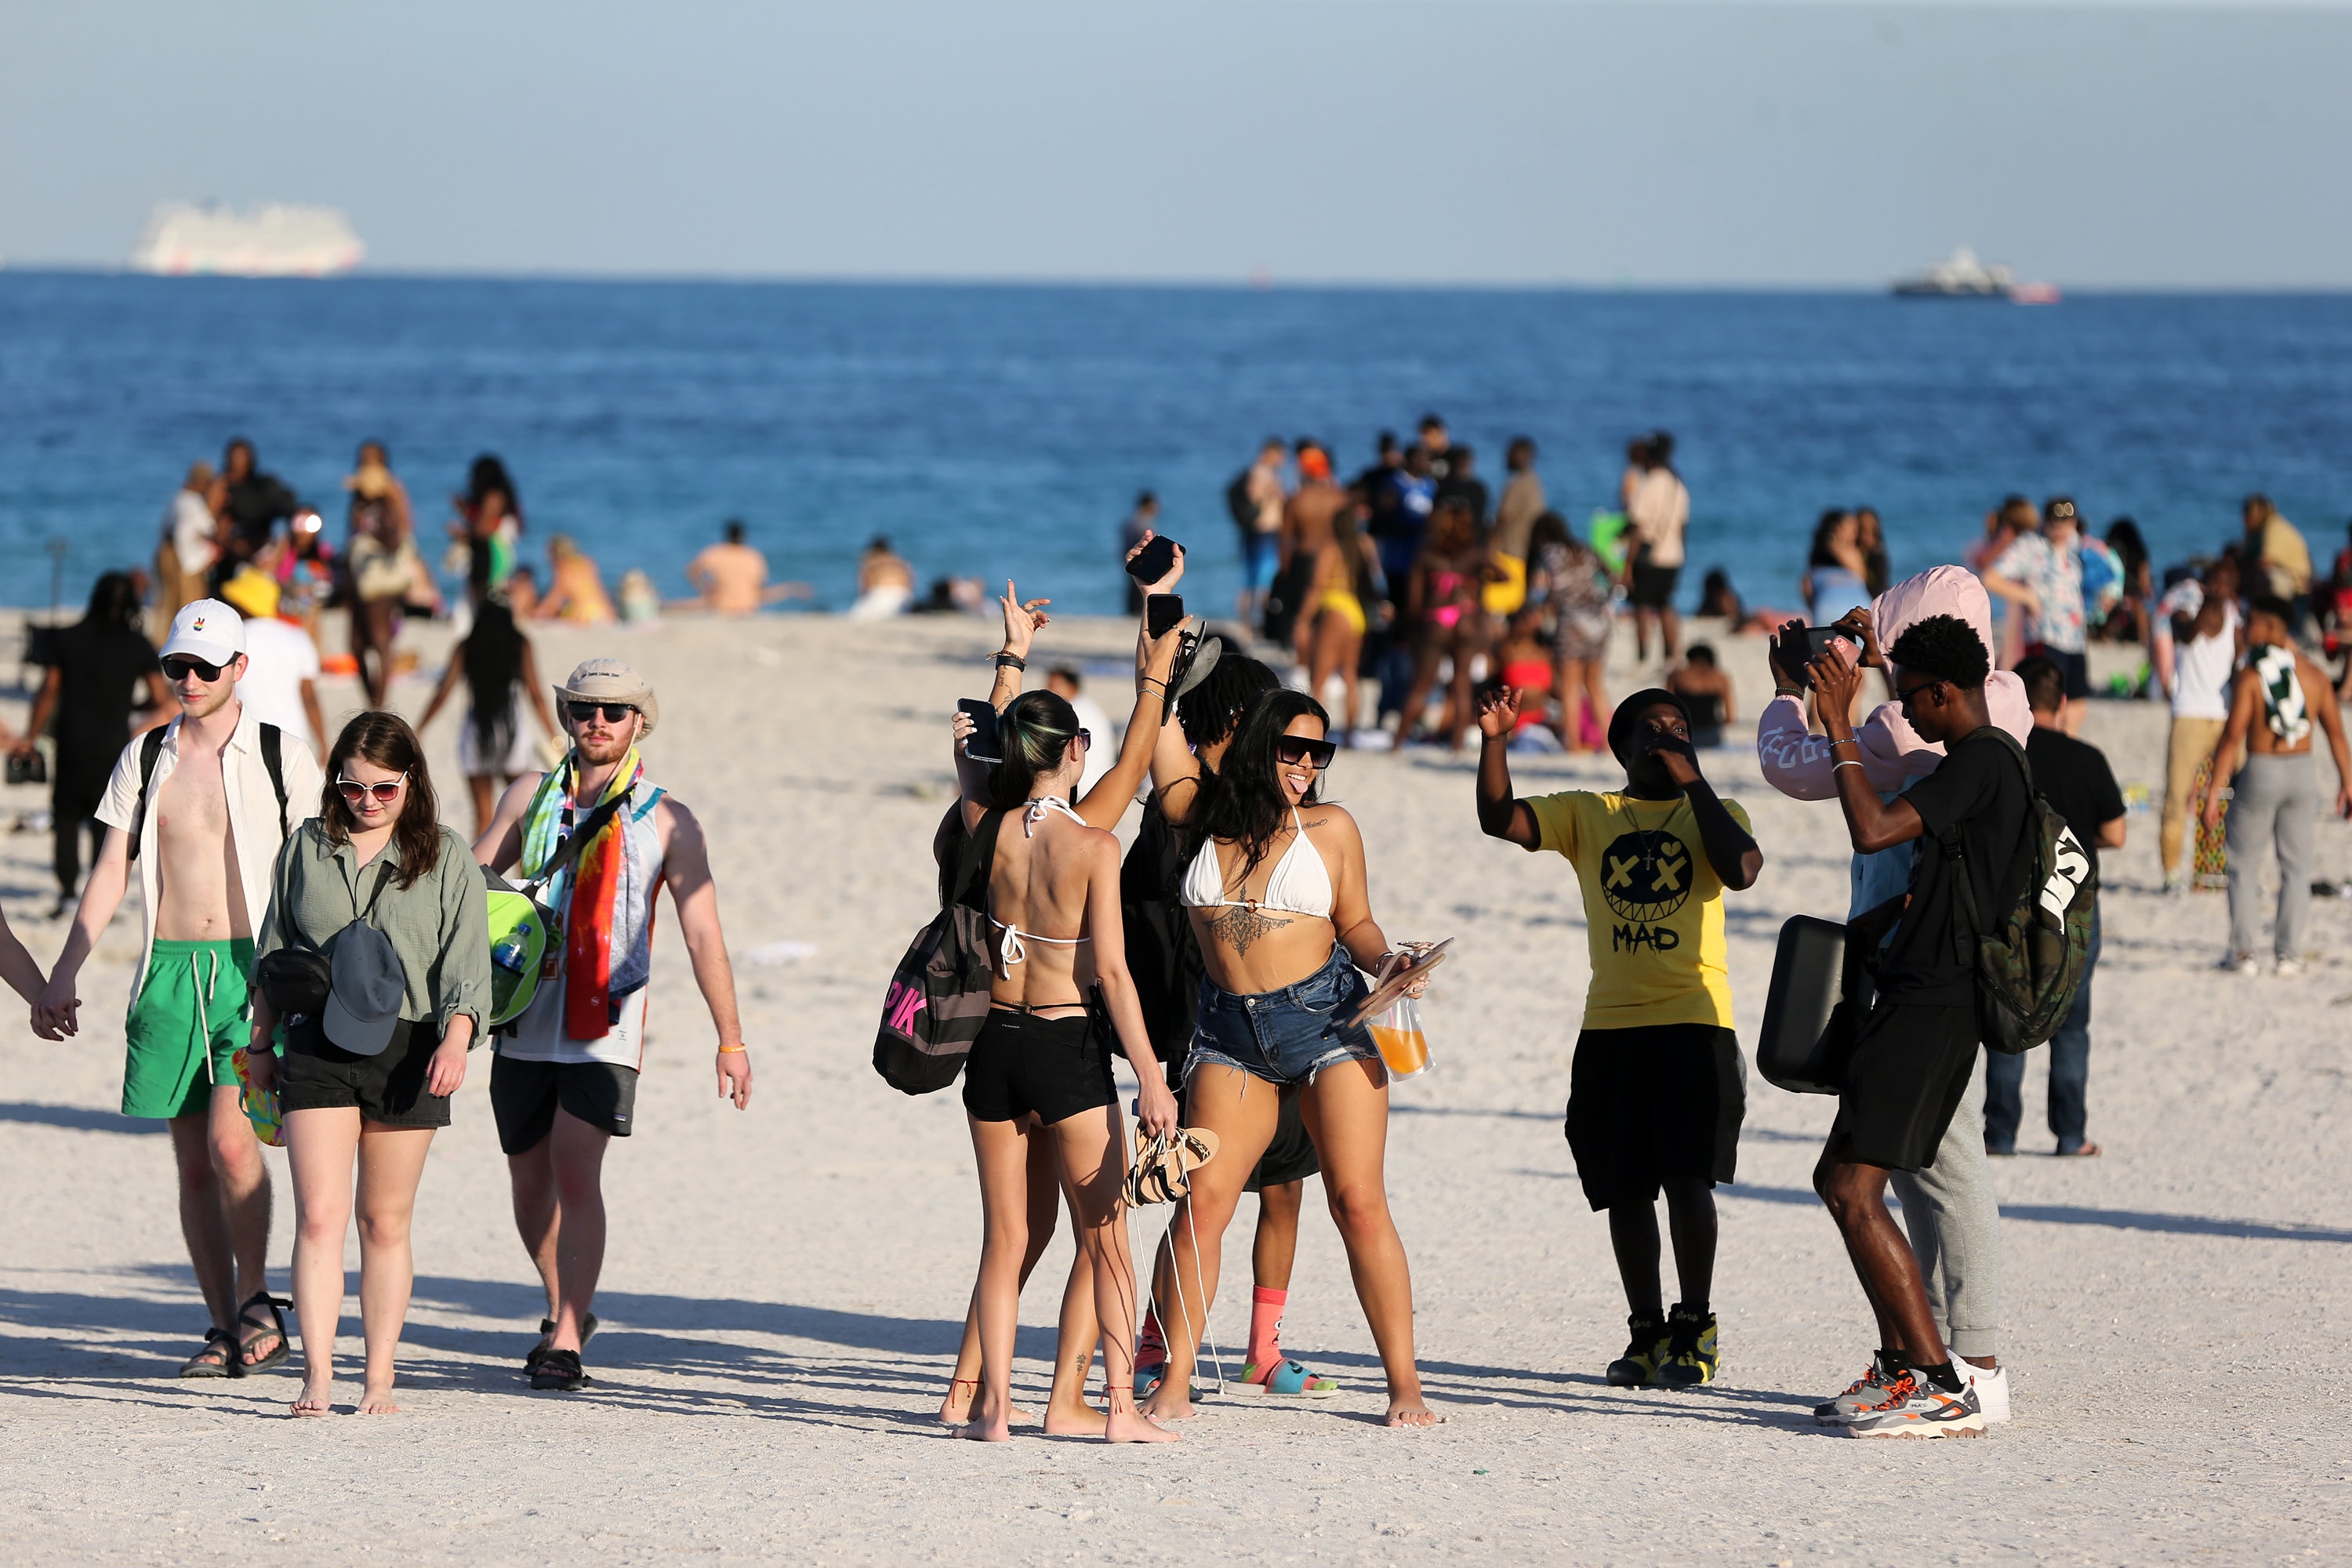 Why I fear as a doctor that spring break 2023 will be the most dangerous ever